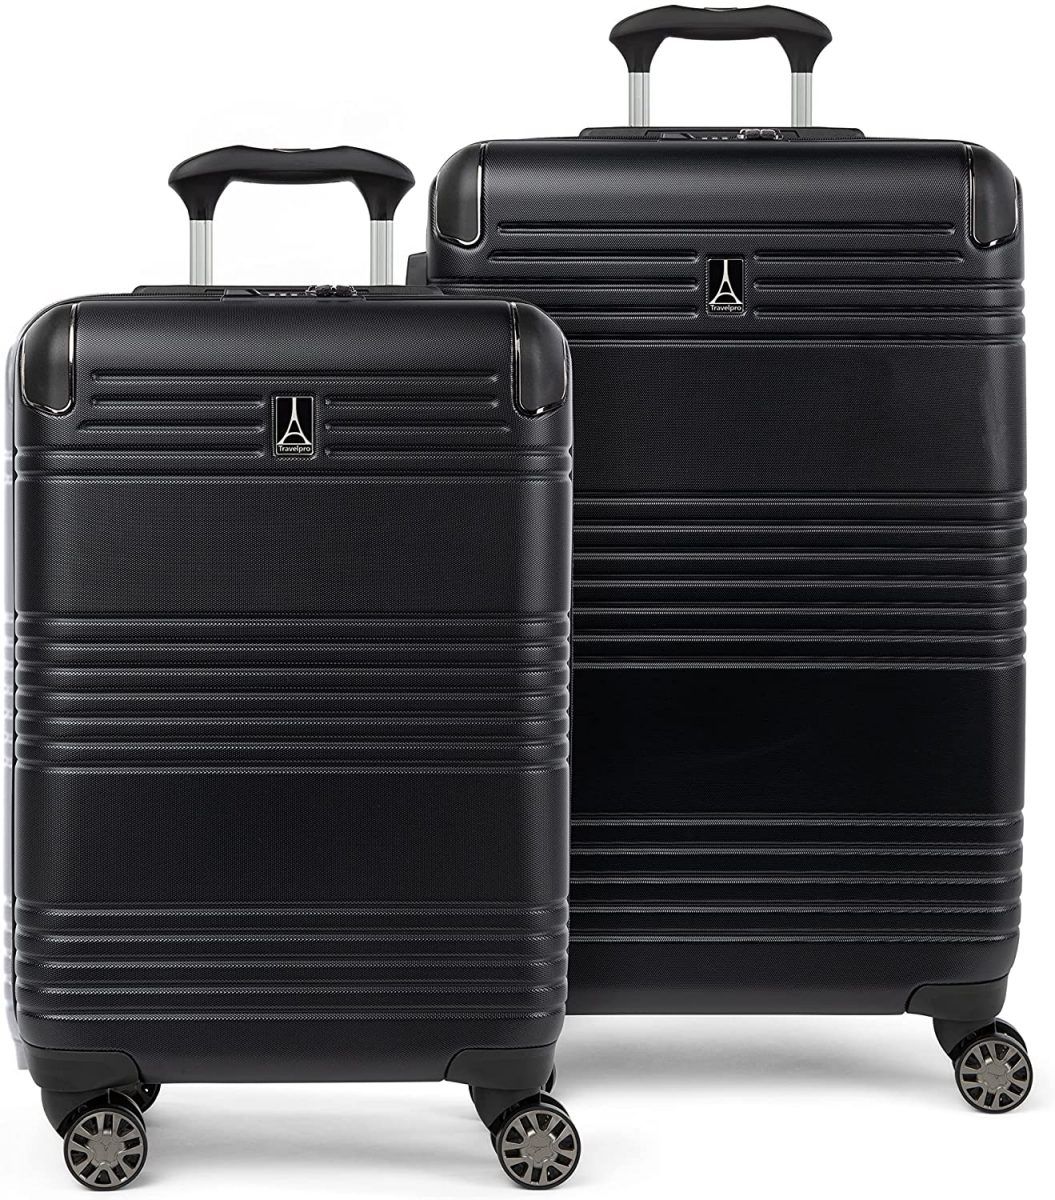 Product image for the Travelpro Roundtrip Hardside Expandable Luggage Set in black.